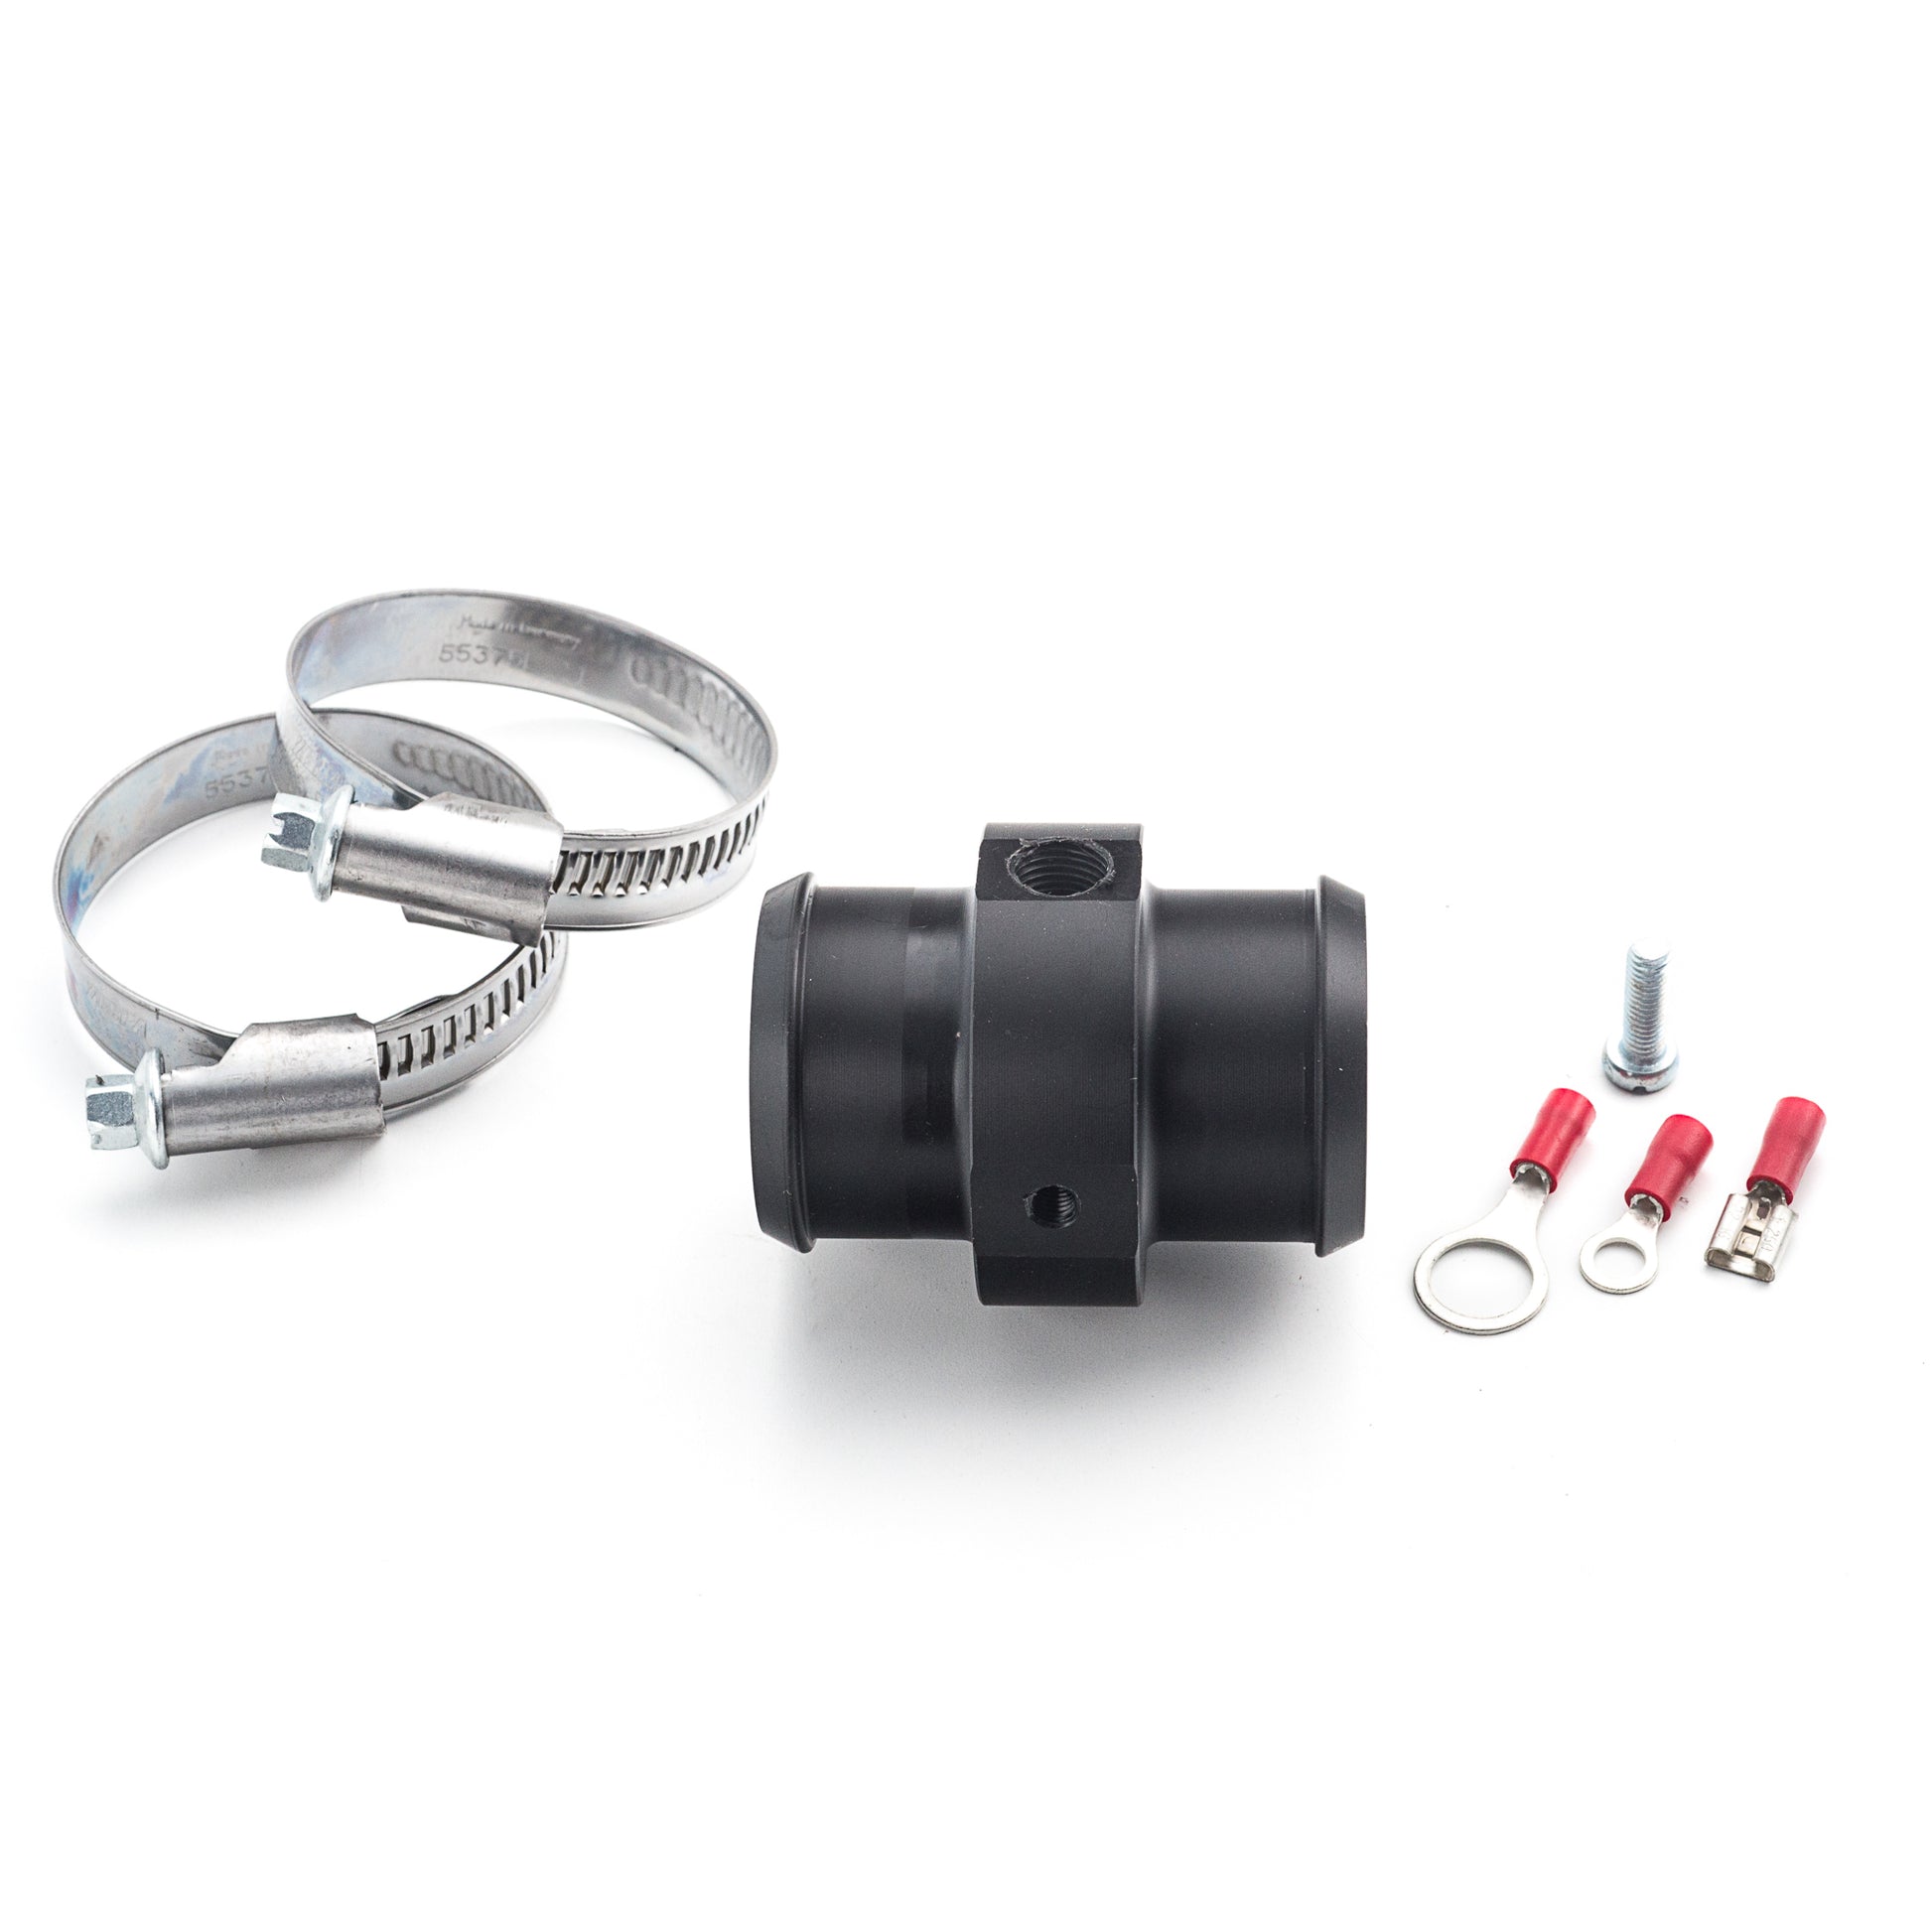 35mm (1.38") Coolant Hose Adapter for Coolant Temperature and Level Measurements